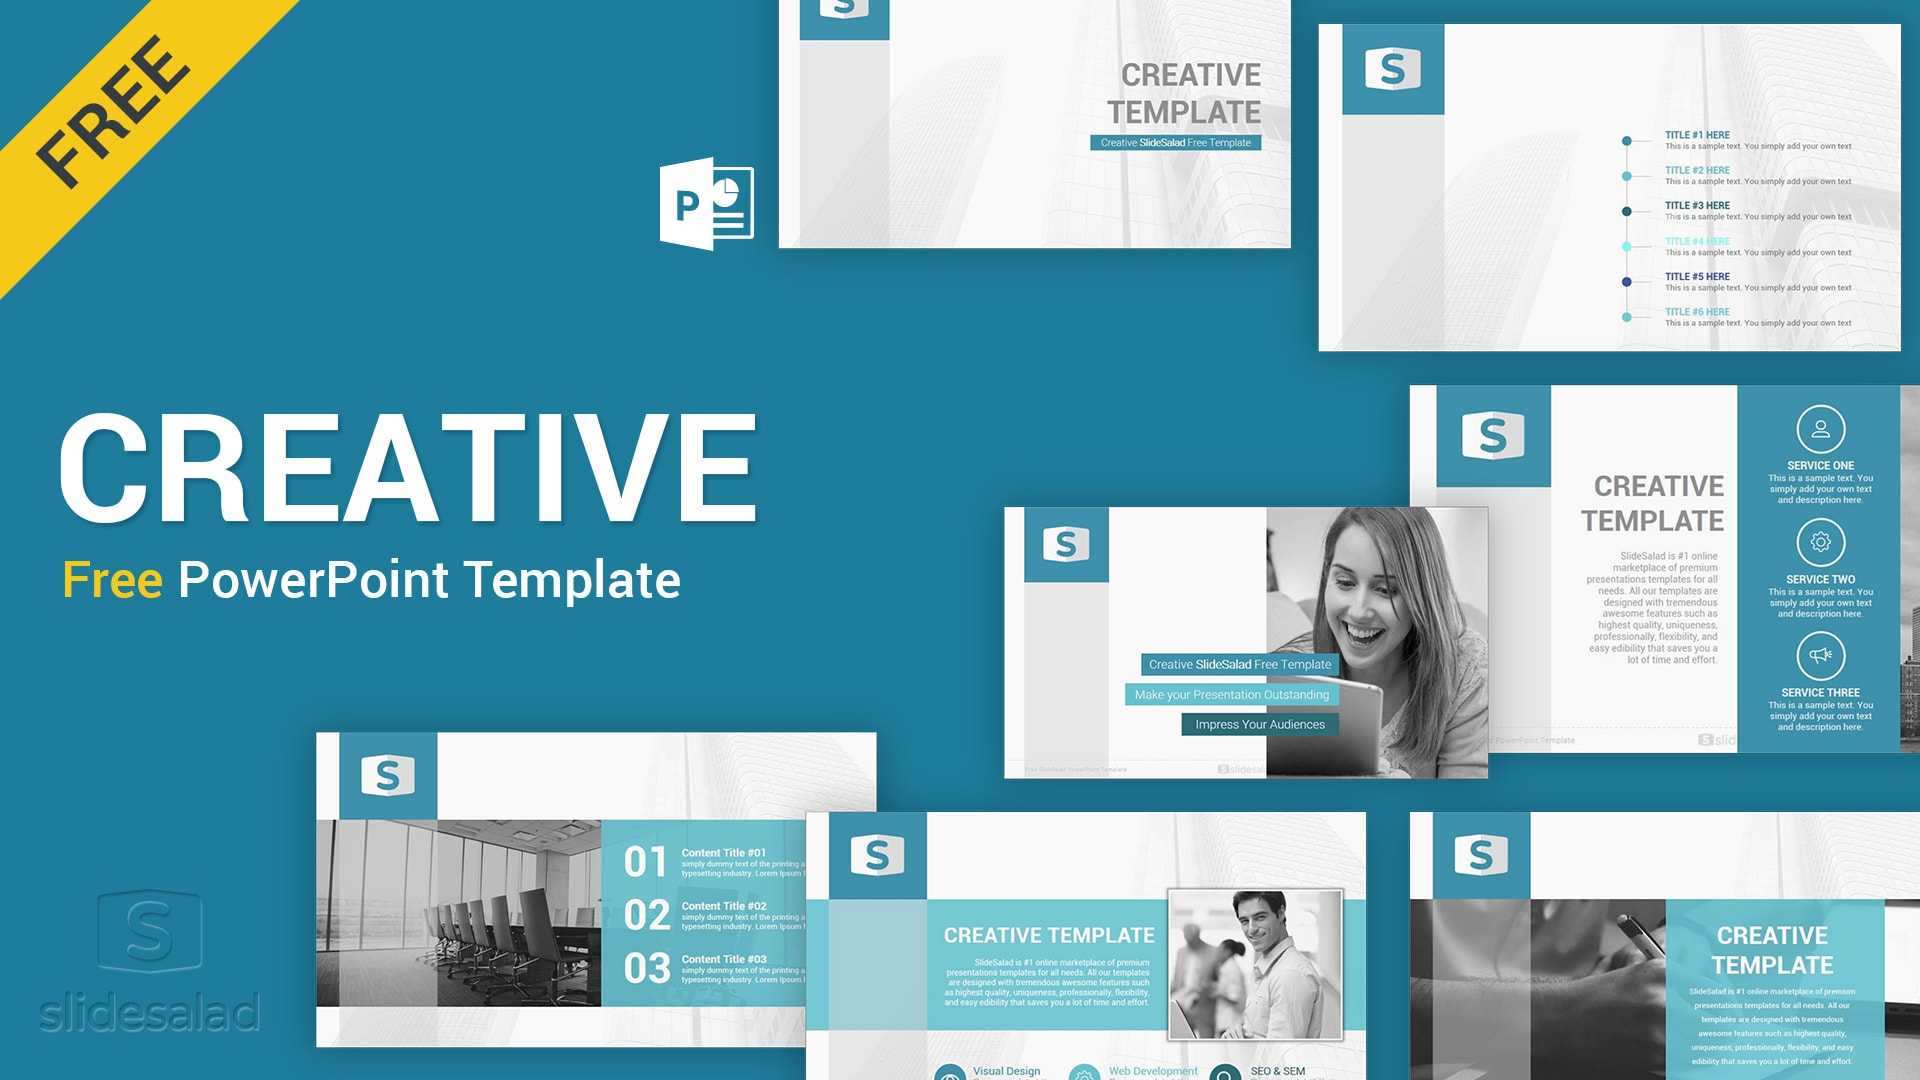 Creative Free Download Powerpoint Template – Slidesalad Inside Free Powerpoint Presentation Templates Downloads